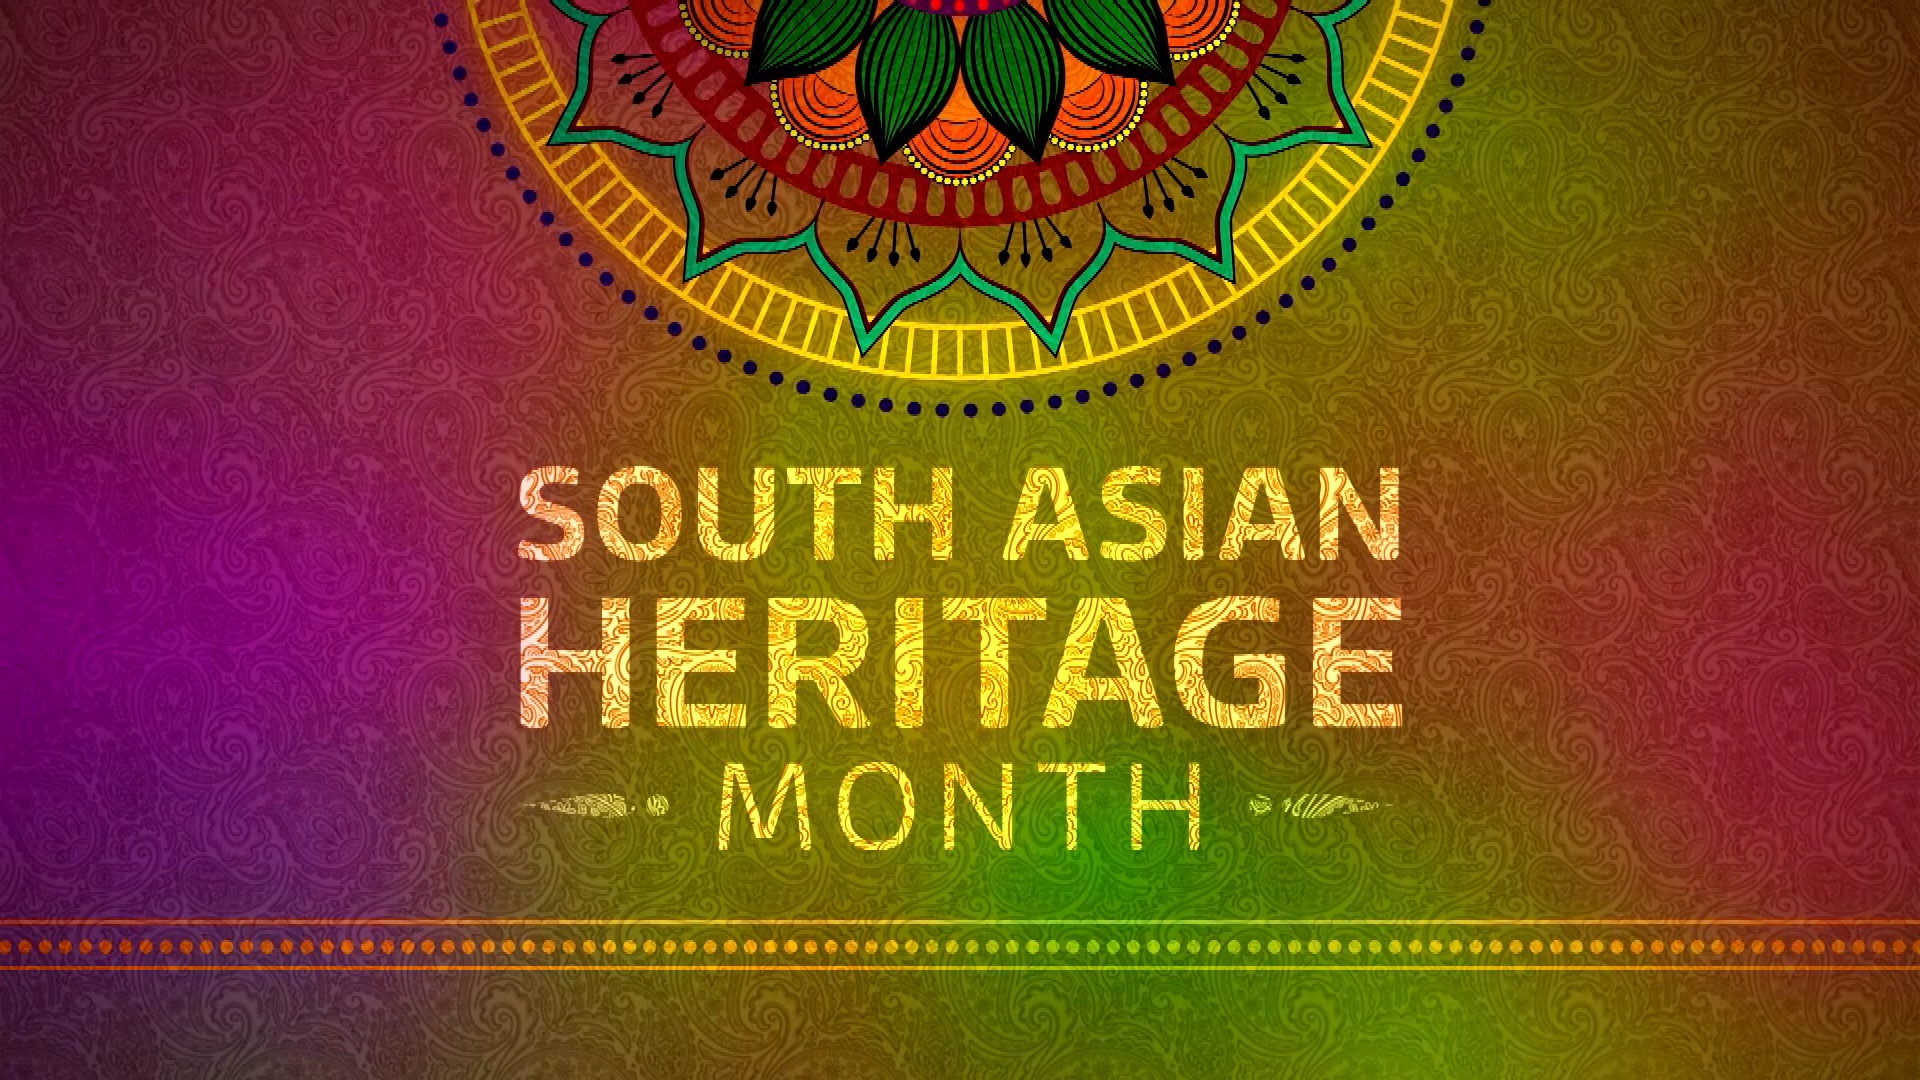 Why Is South Asian Heritage Month So Important?